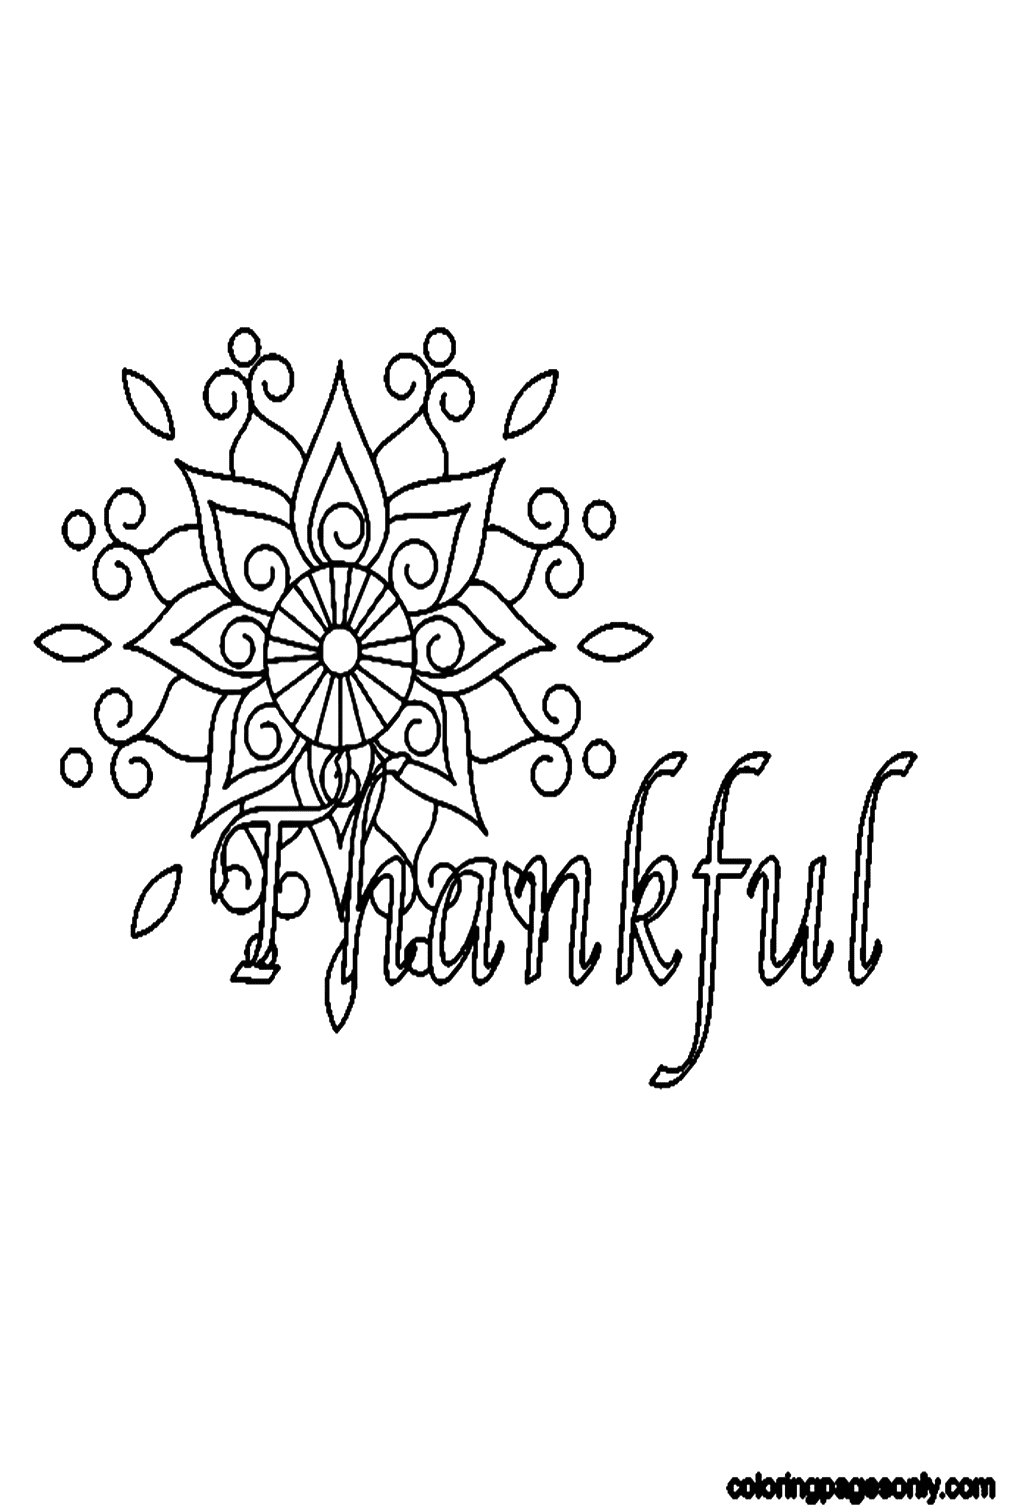 Printable Thanhkful Coloring Pages